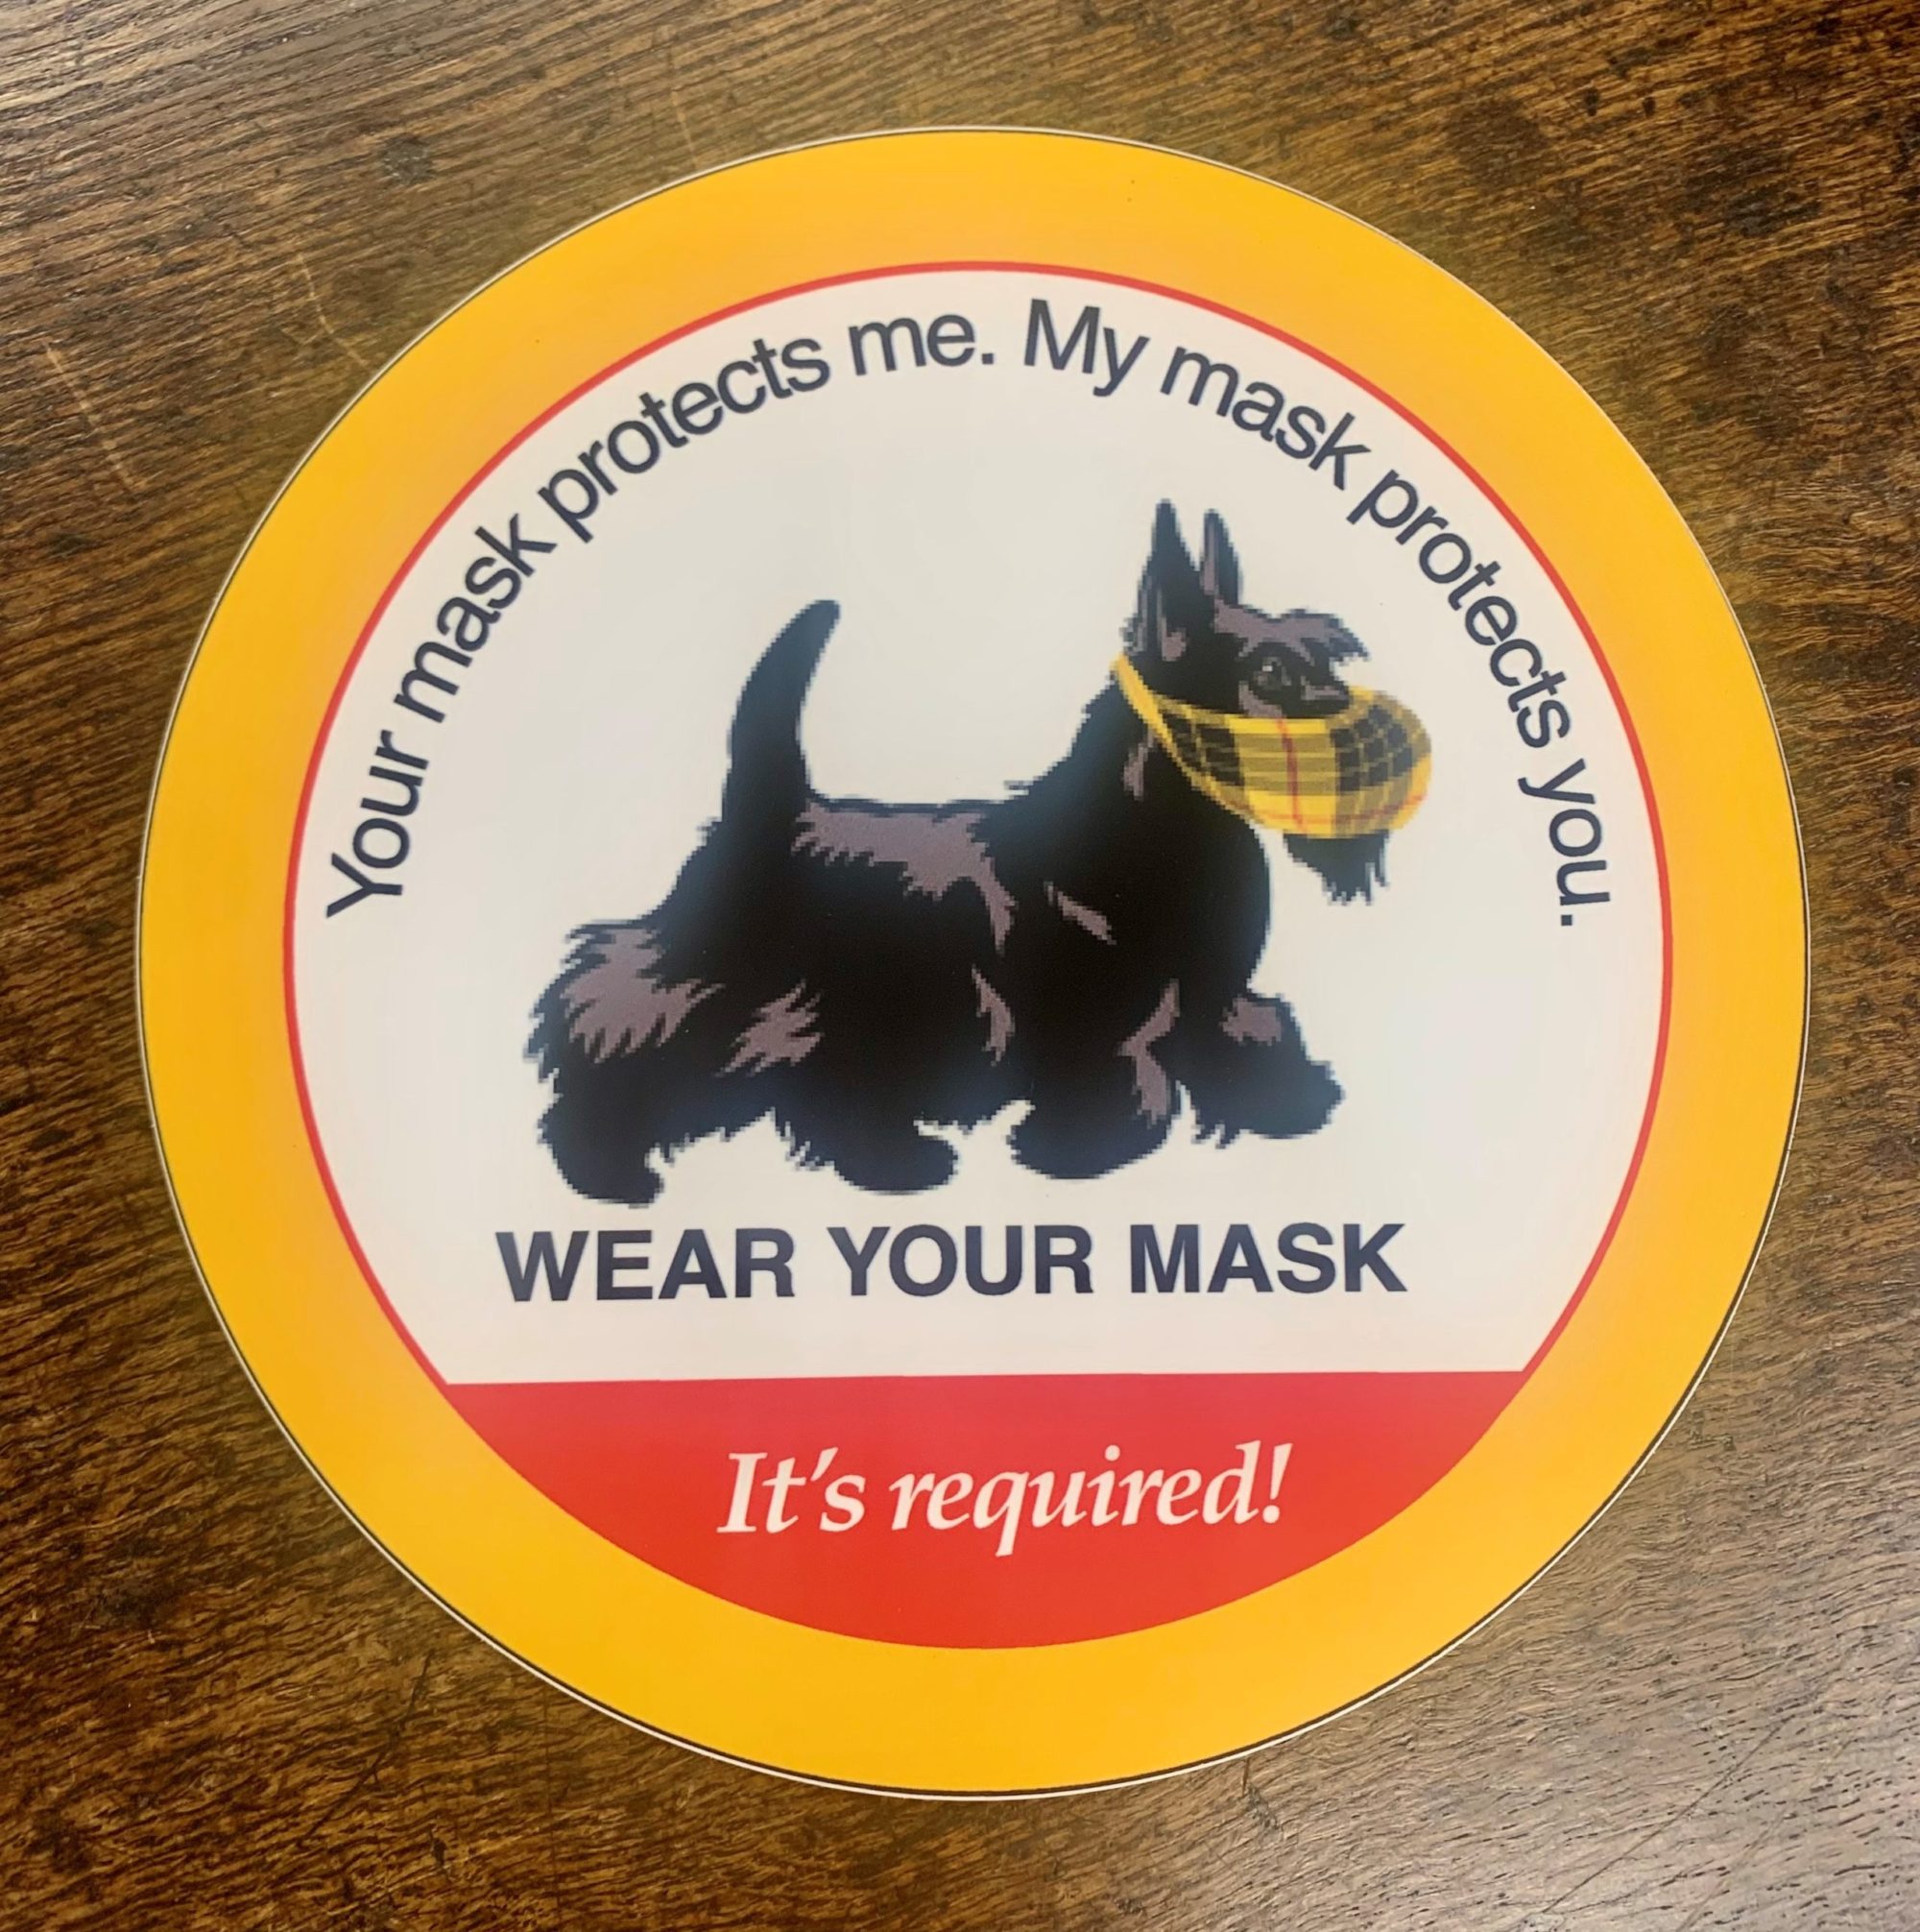 Wear for mask sign with a dog wearing a mask and the words "Your mask protects me. My mask protects you. It's required!"